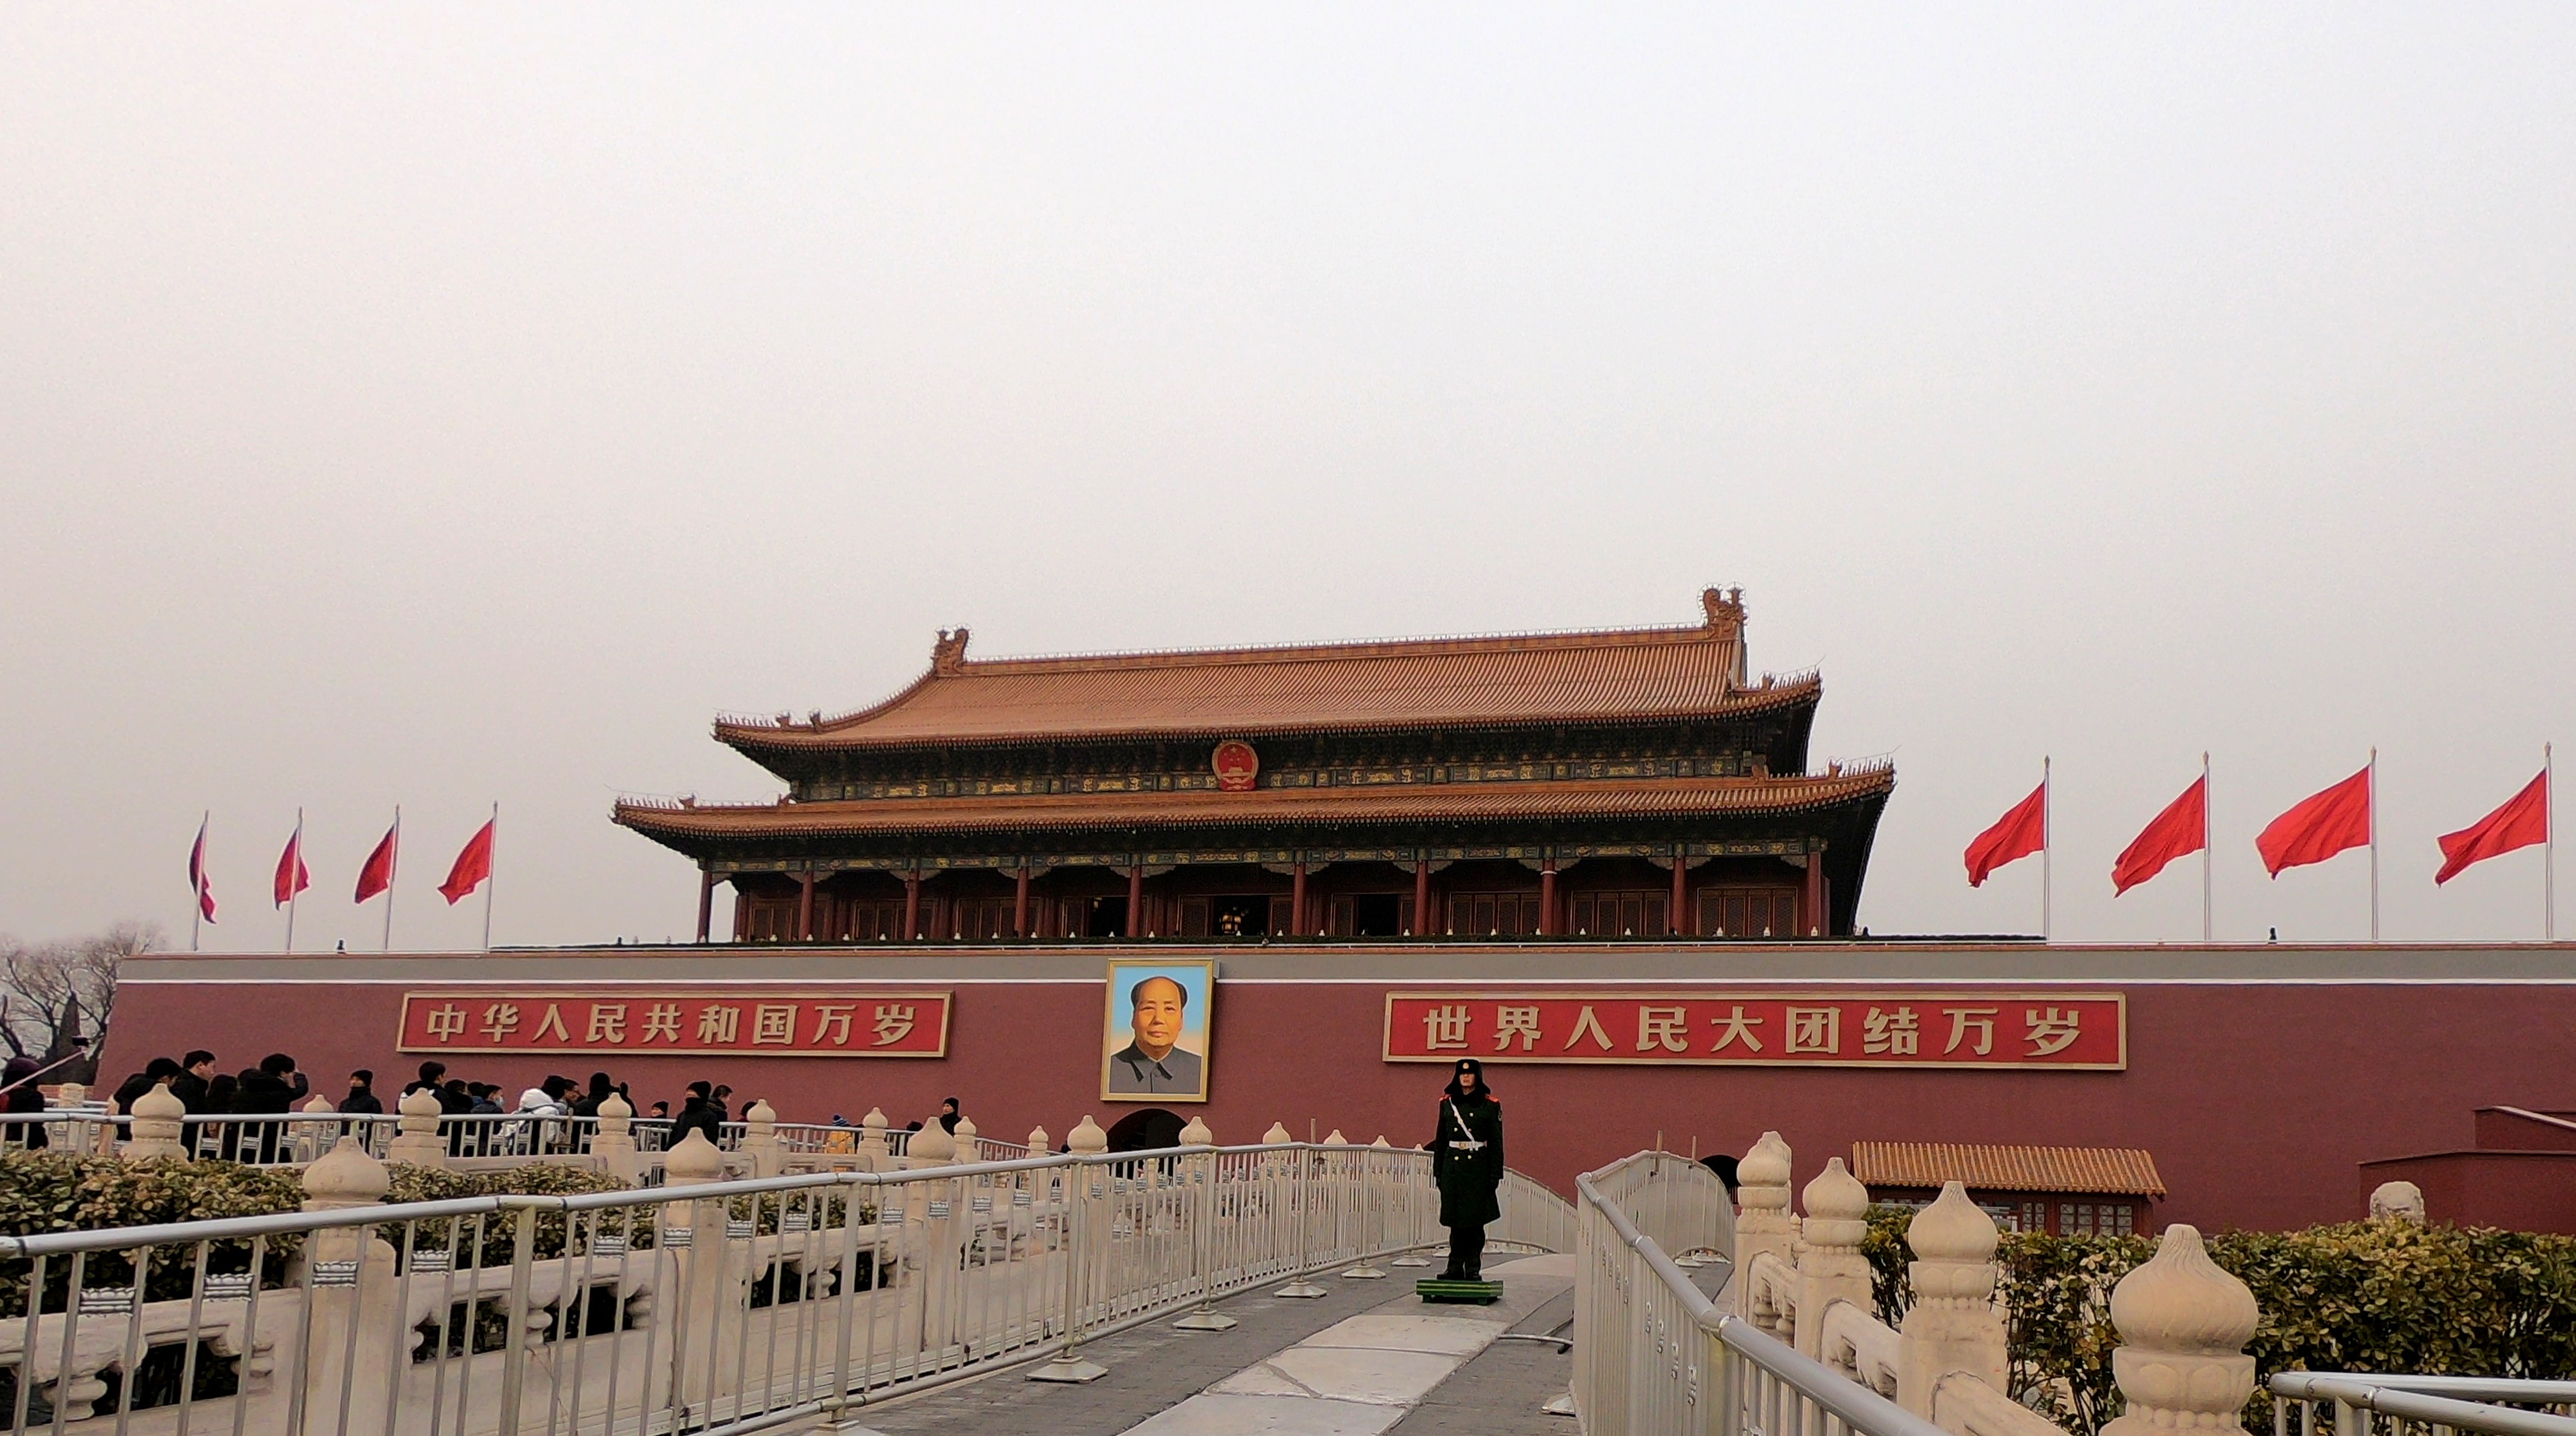 6 things you won’t want to miss during your trip to Beijing